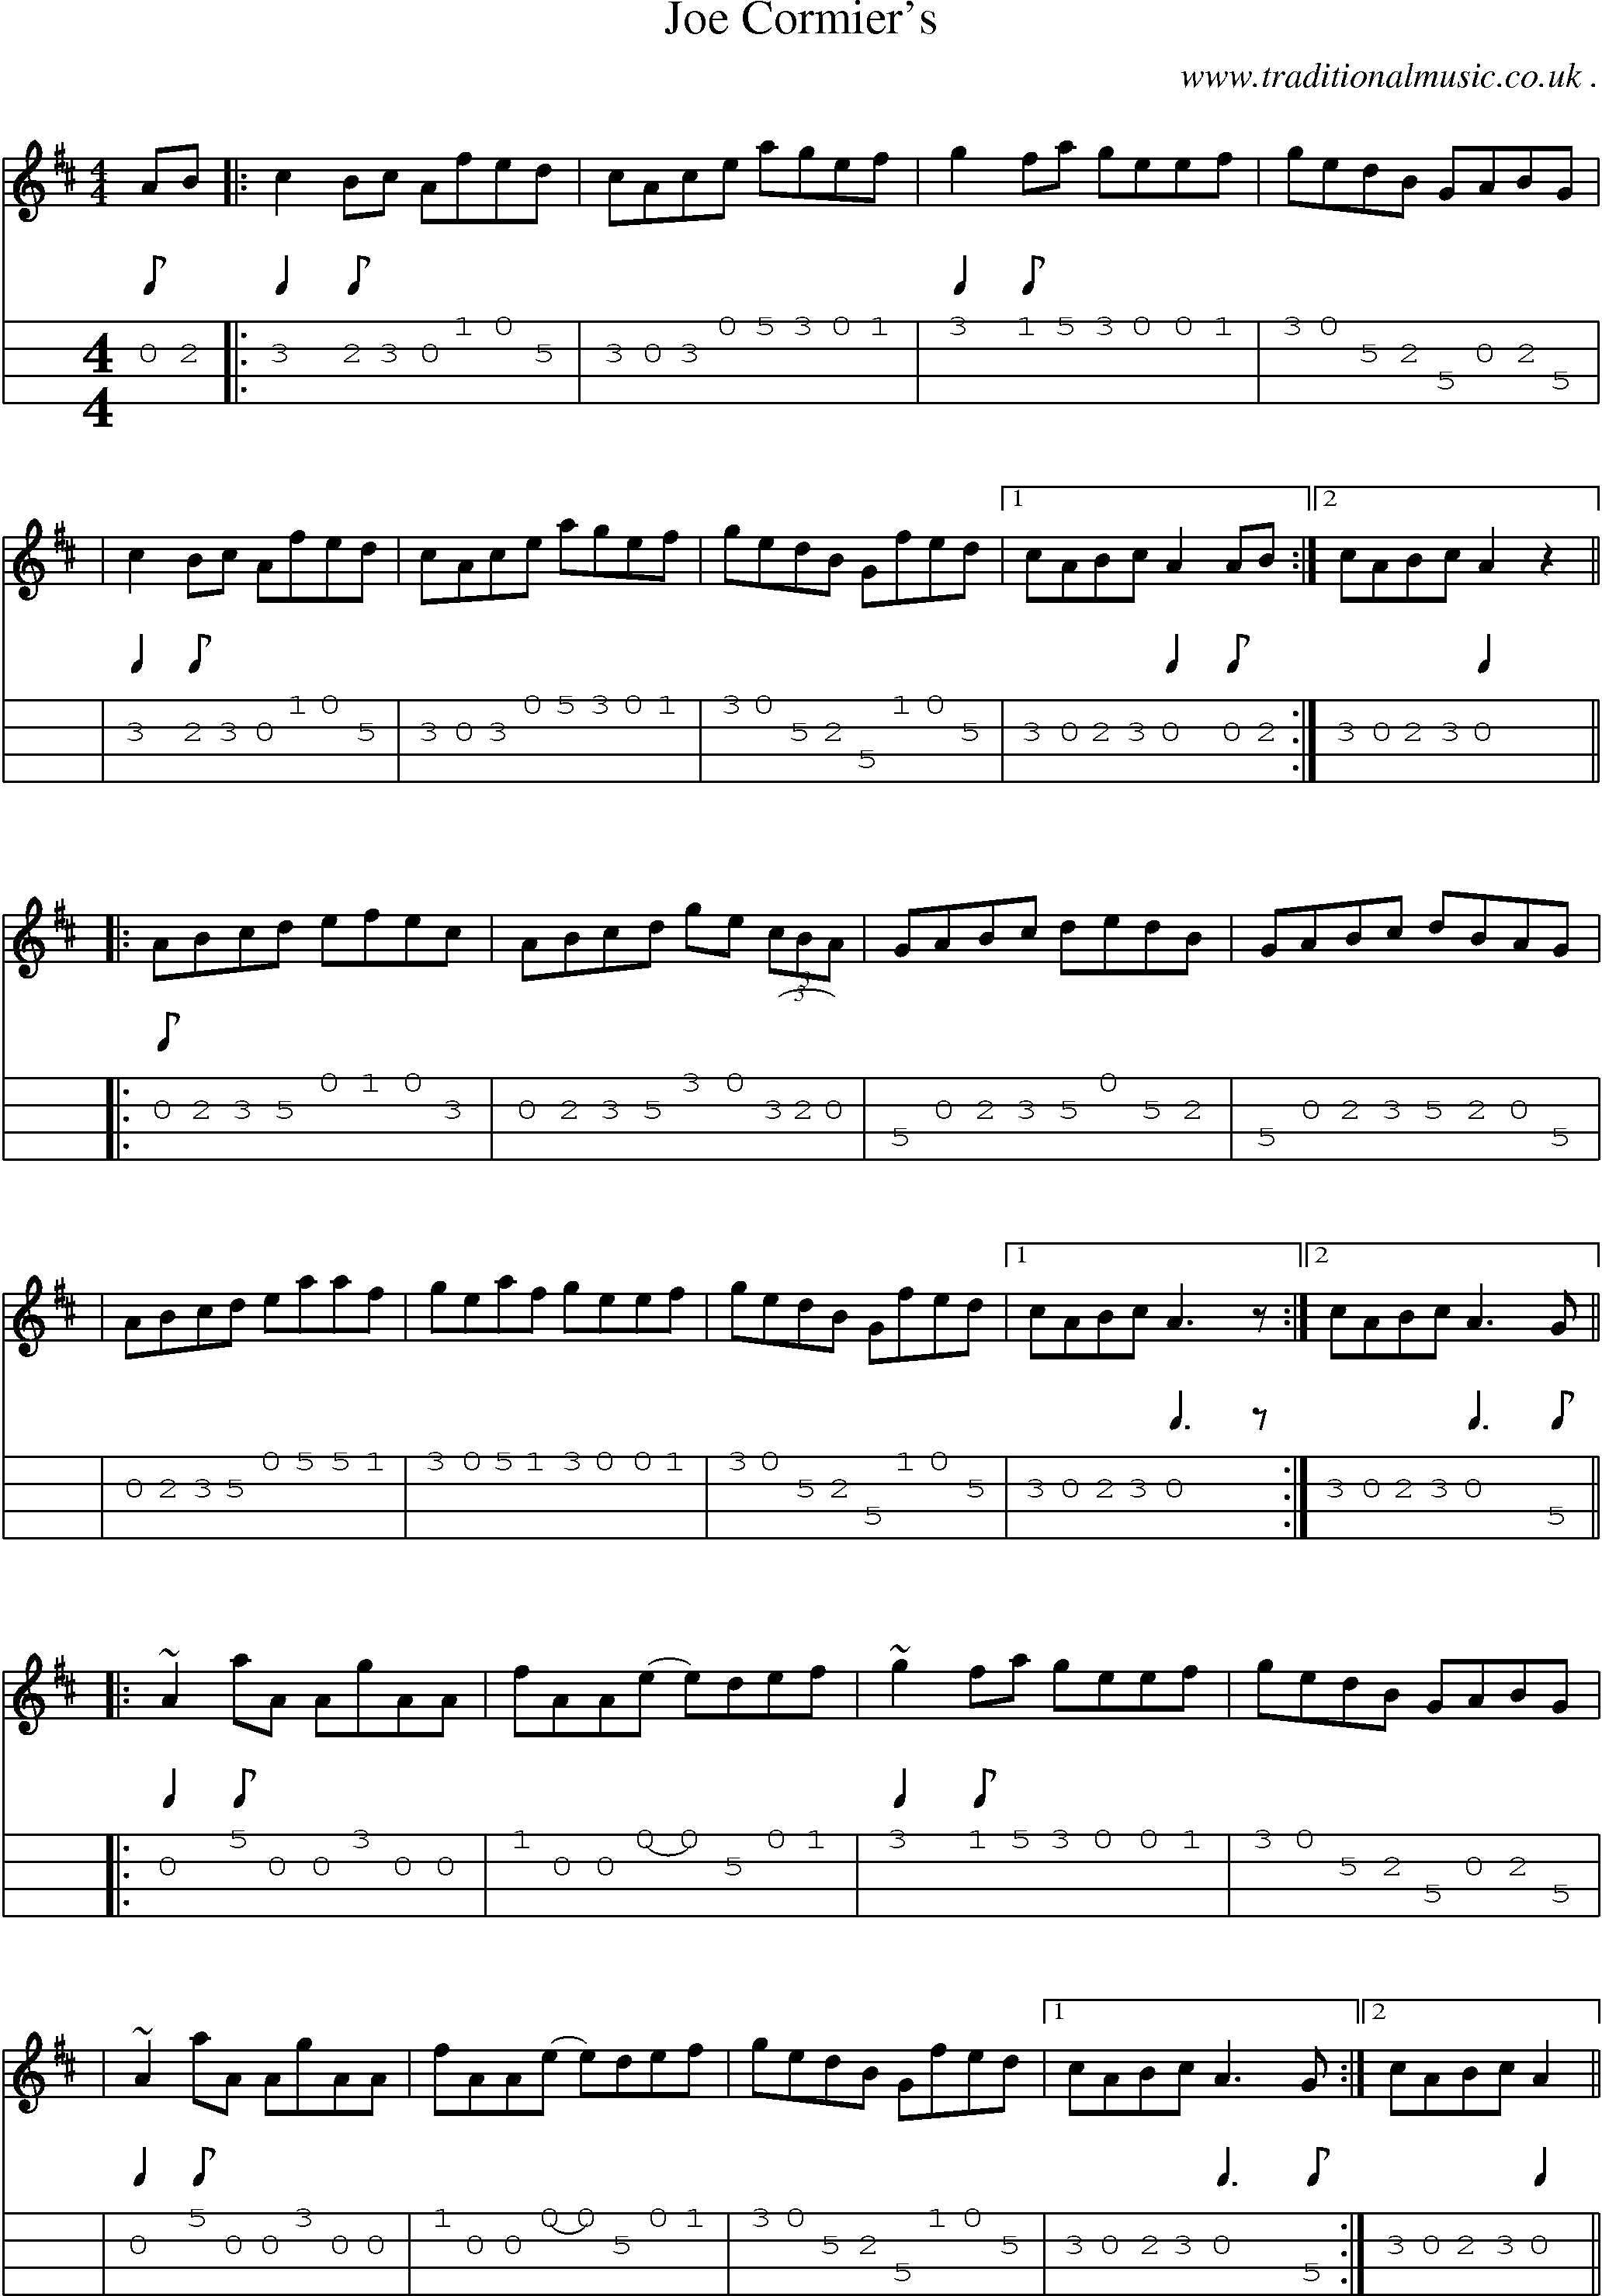 Sheet-music  score, Chords and Mandolin Tabs for Joe Cormiers